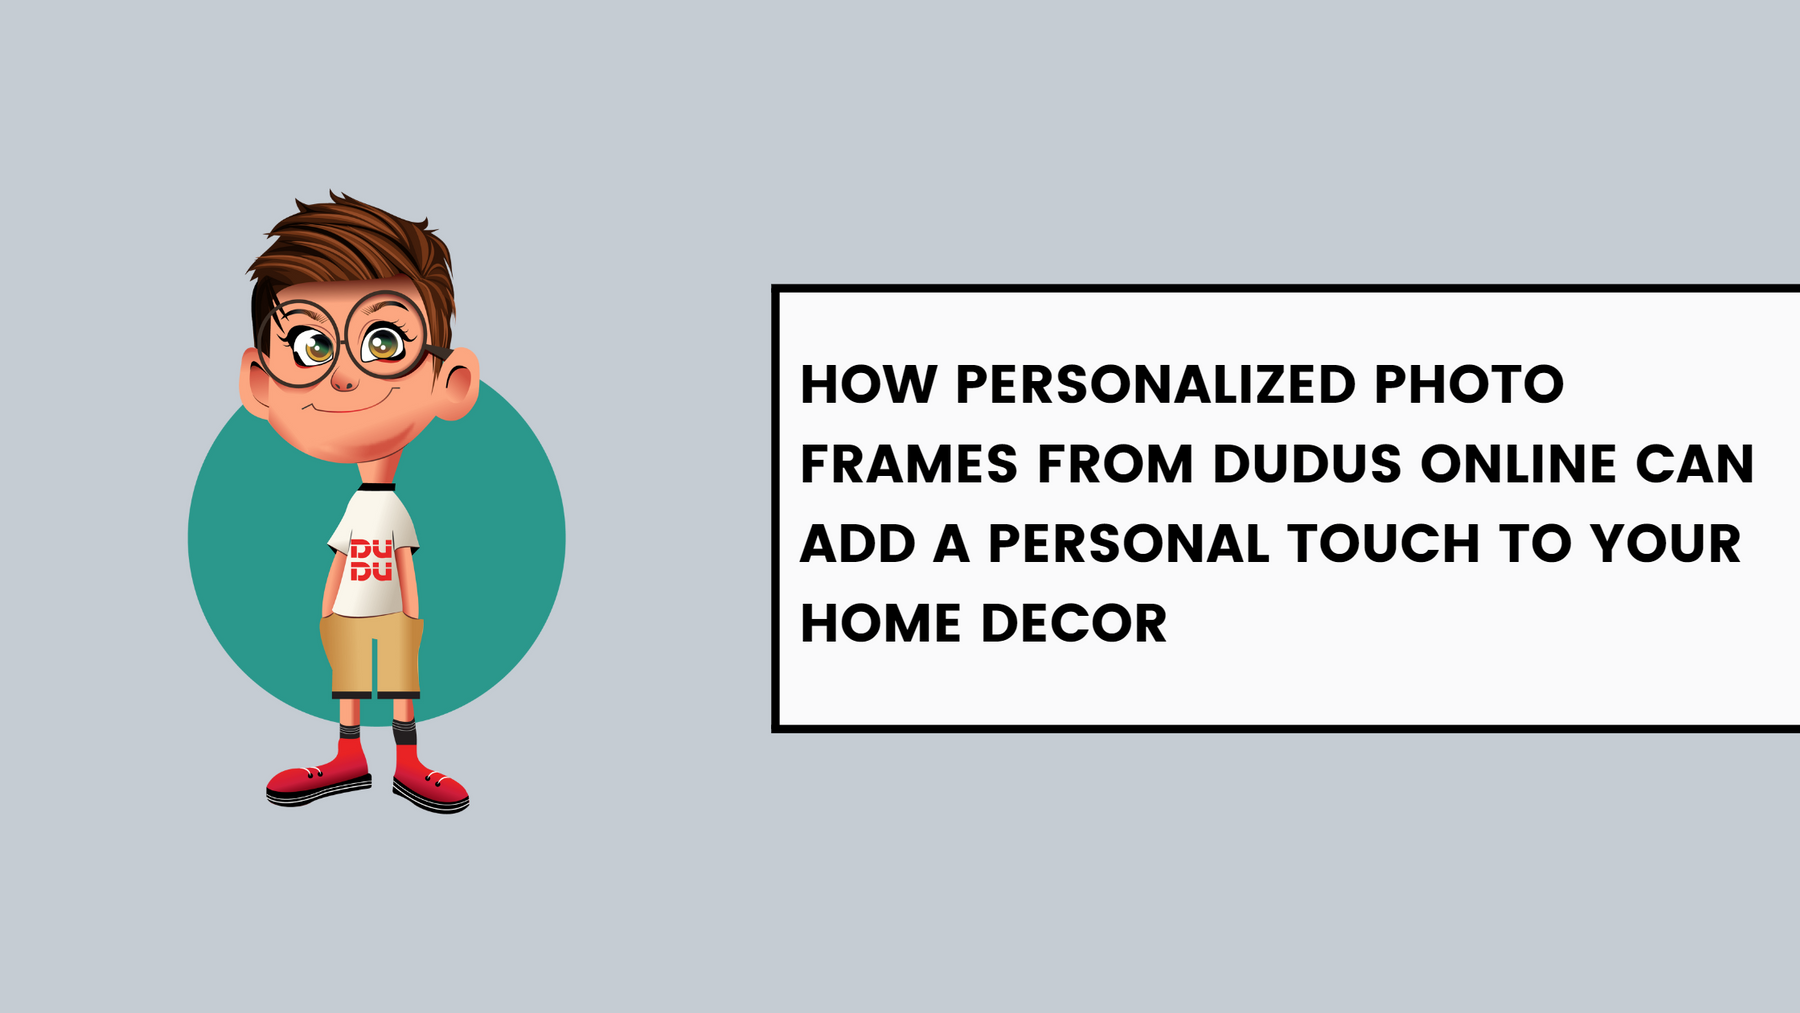 How Personalized Photo Frames from Dudus Online Can Add a Personal Touch to Your Home Decor